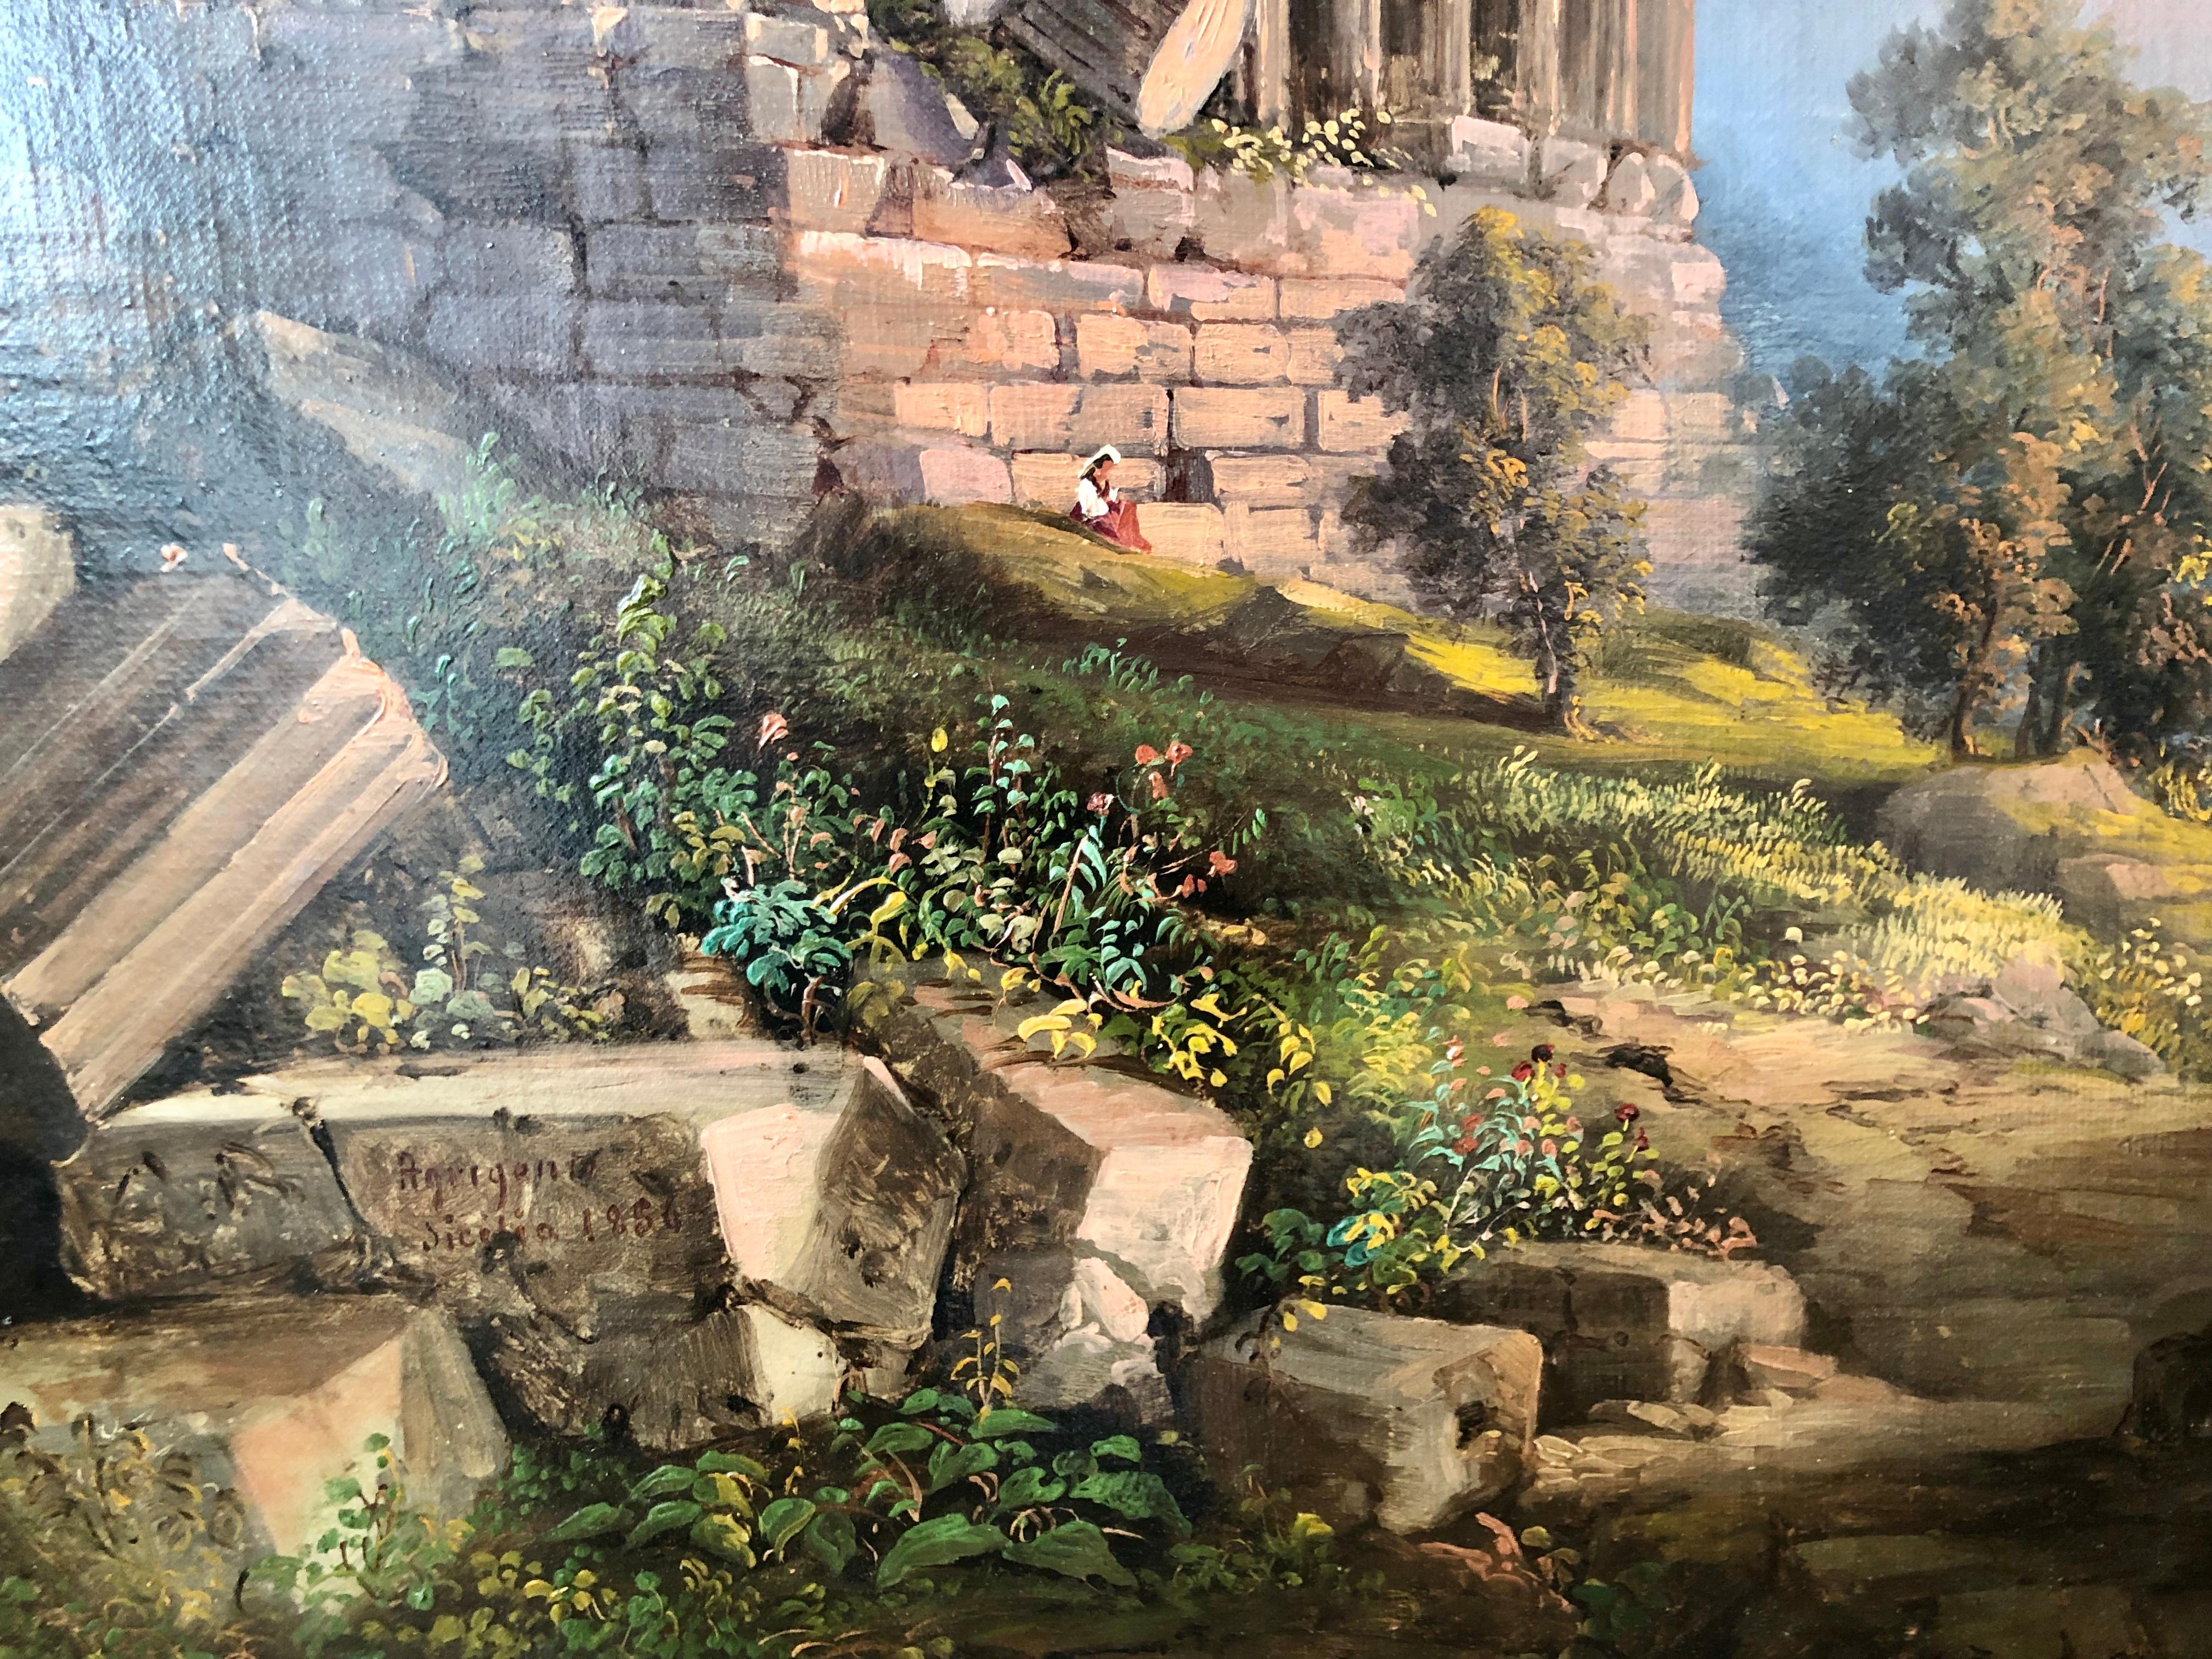 Huge 19th century romantic painting depicting a sunset over the Temple Valley in Agrigento, Italy

This magnificent painting depicts the famous Temple Valley in Sicily. We have visited the site to find out from which viewpoint the painter painted